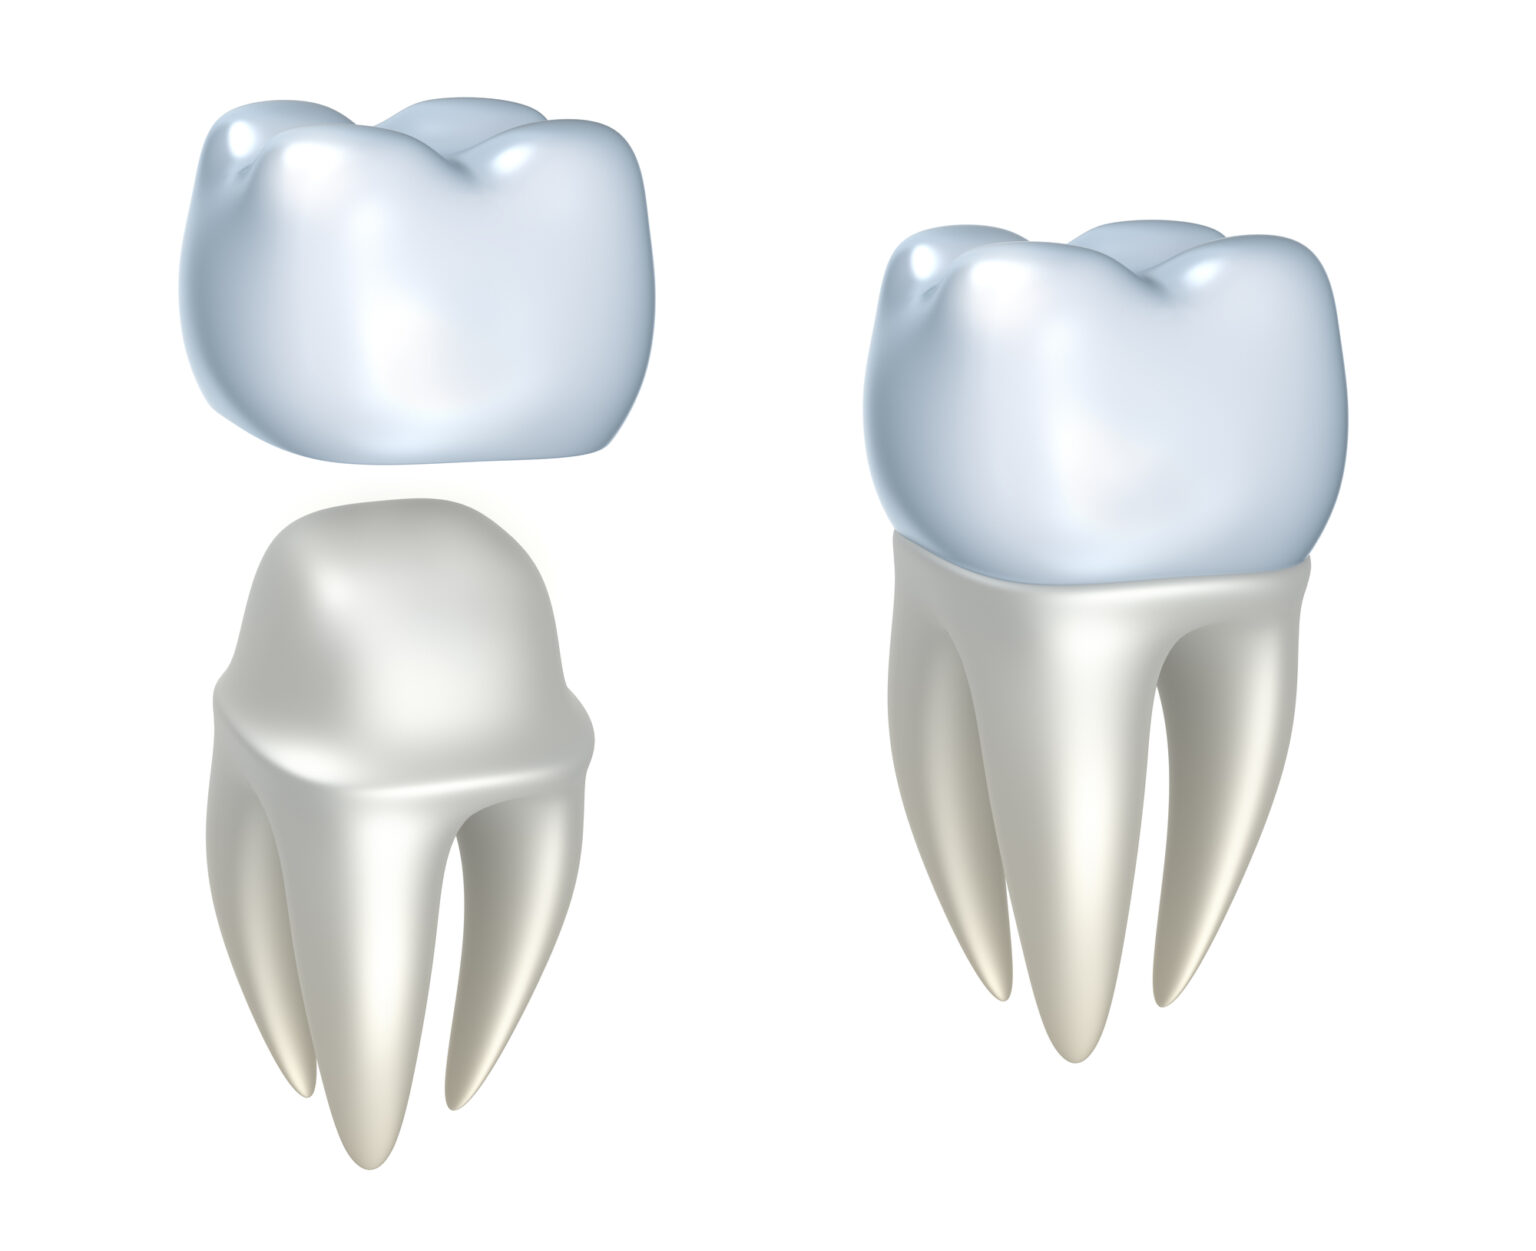 Digital illustration suitable for a dental clinic, showcasing human molars with a single crown and a full tooth including roots.